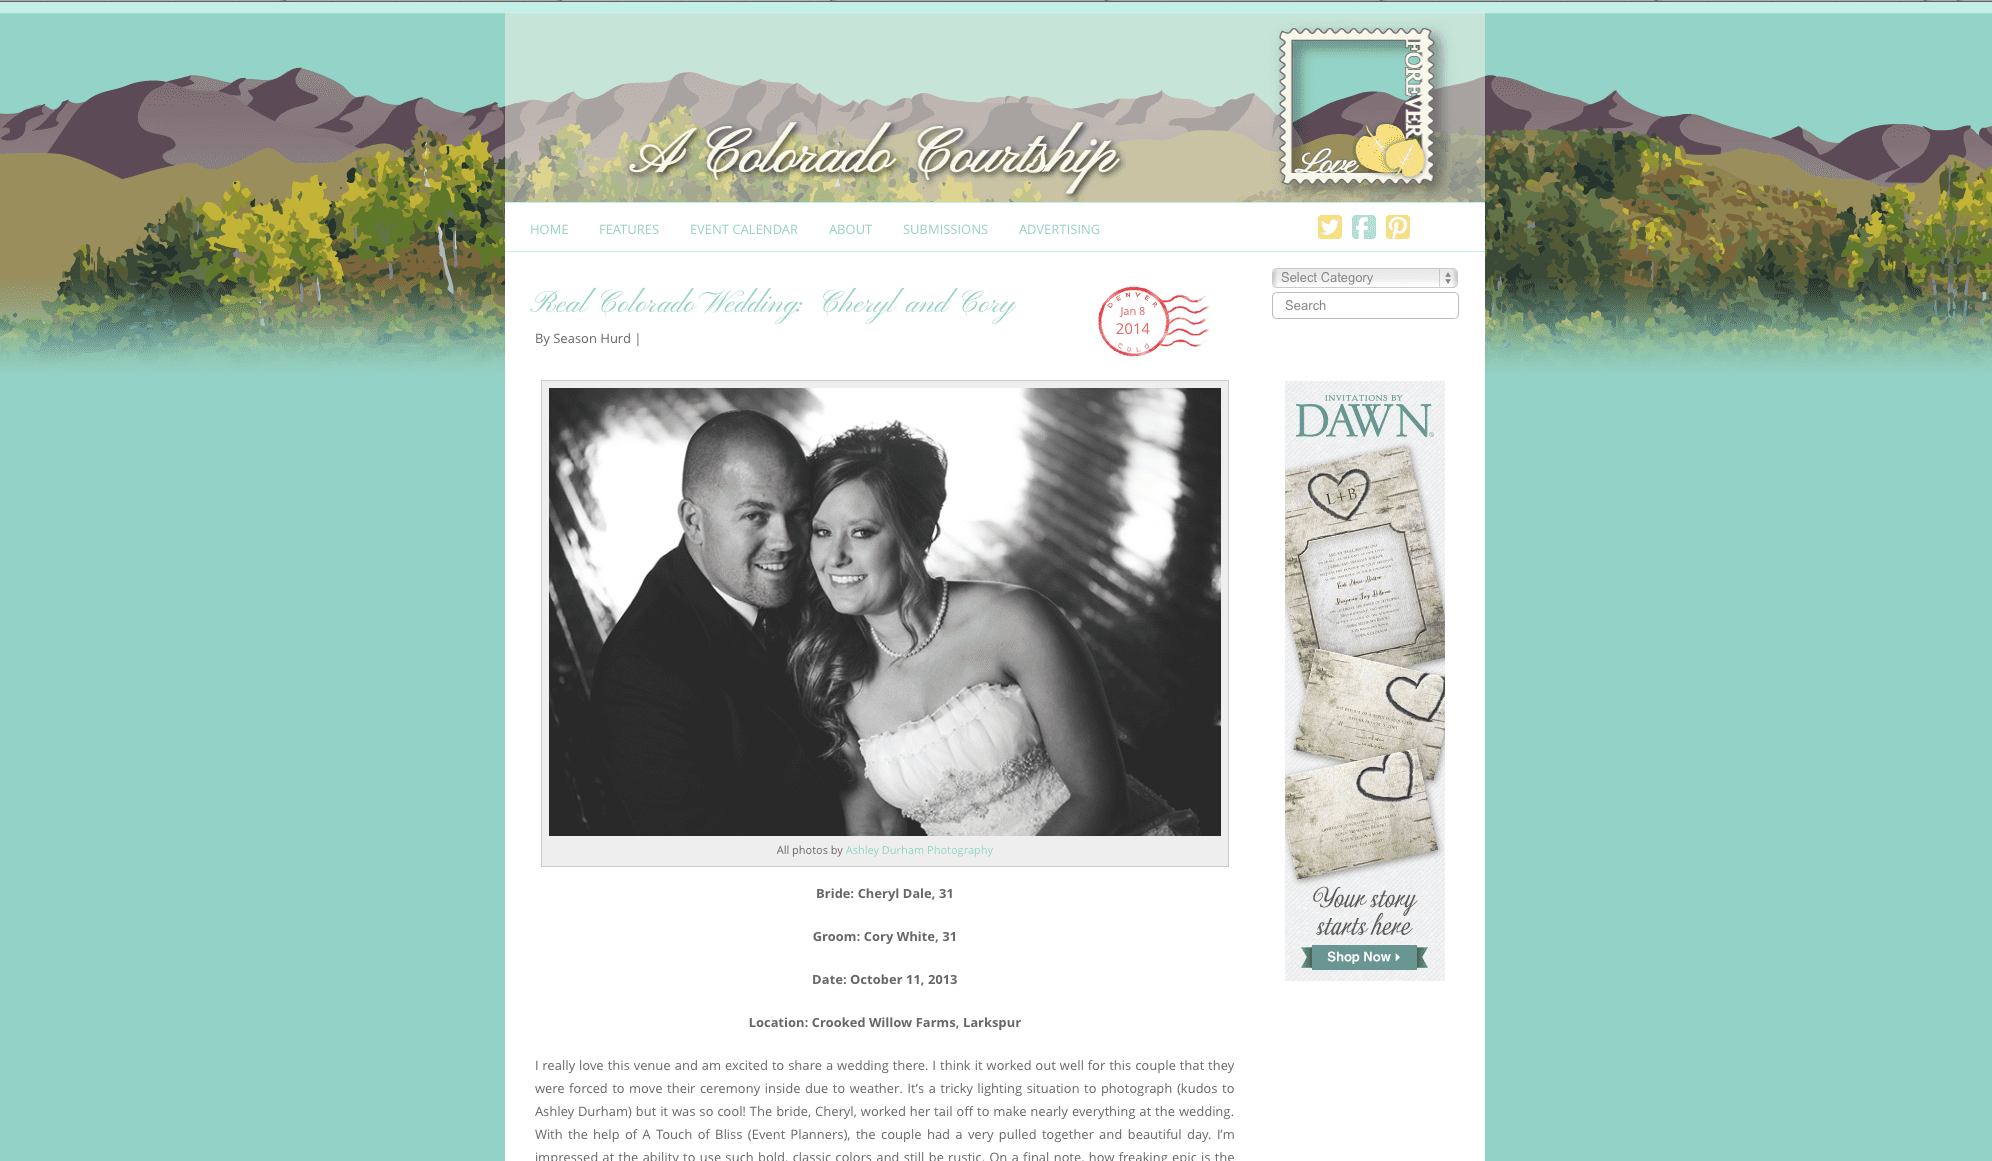 Crooked Willow Farms, Palm Springs wedding photographer